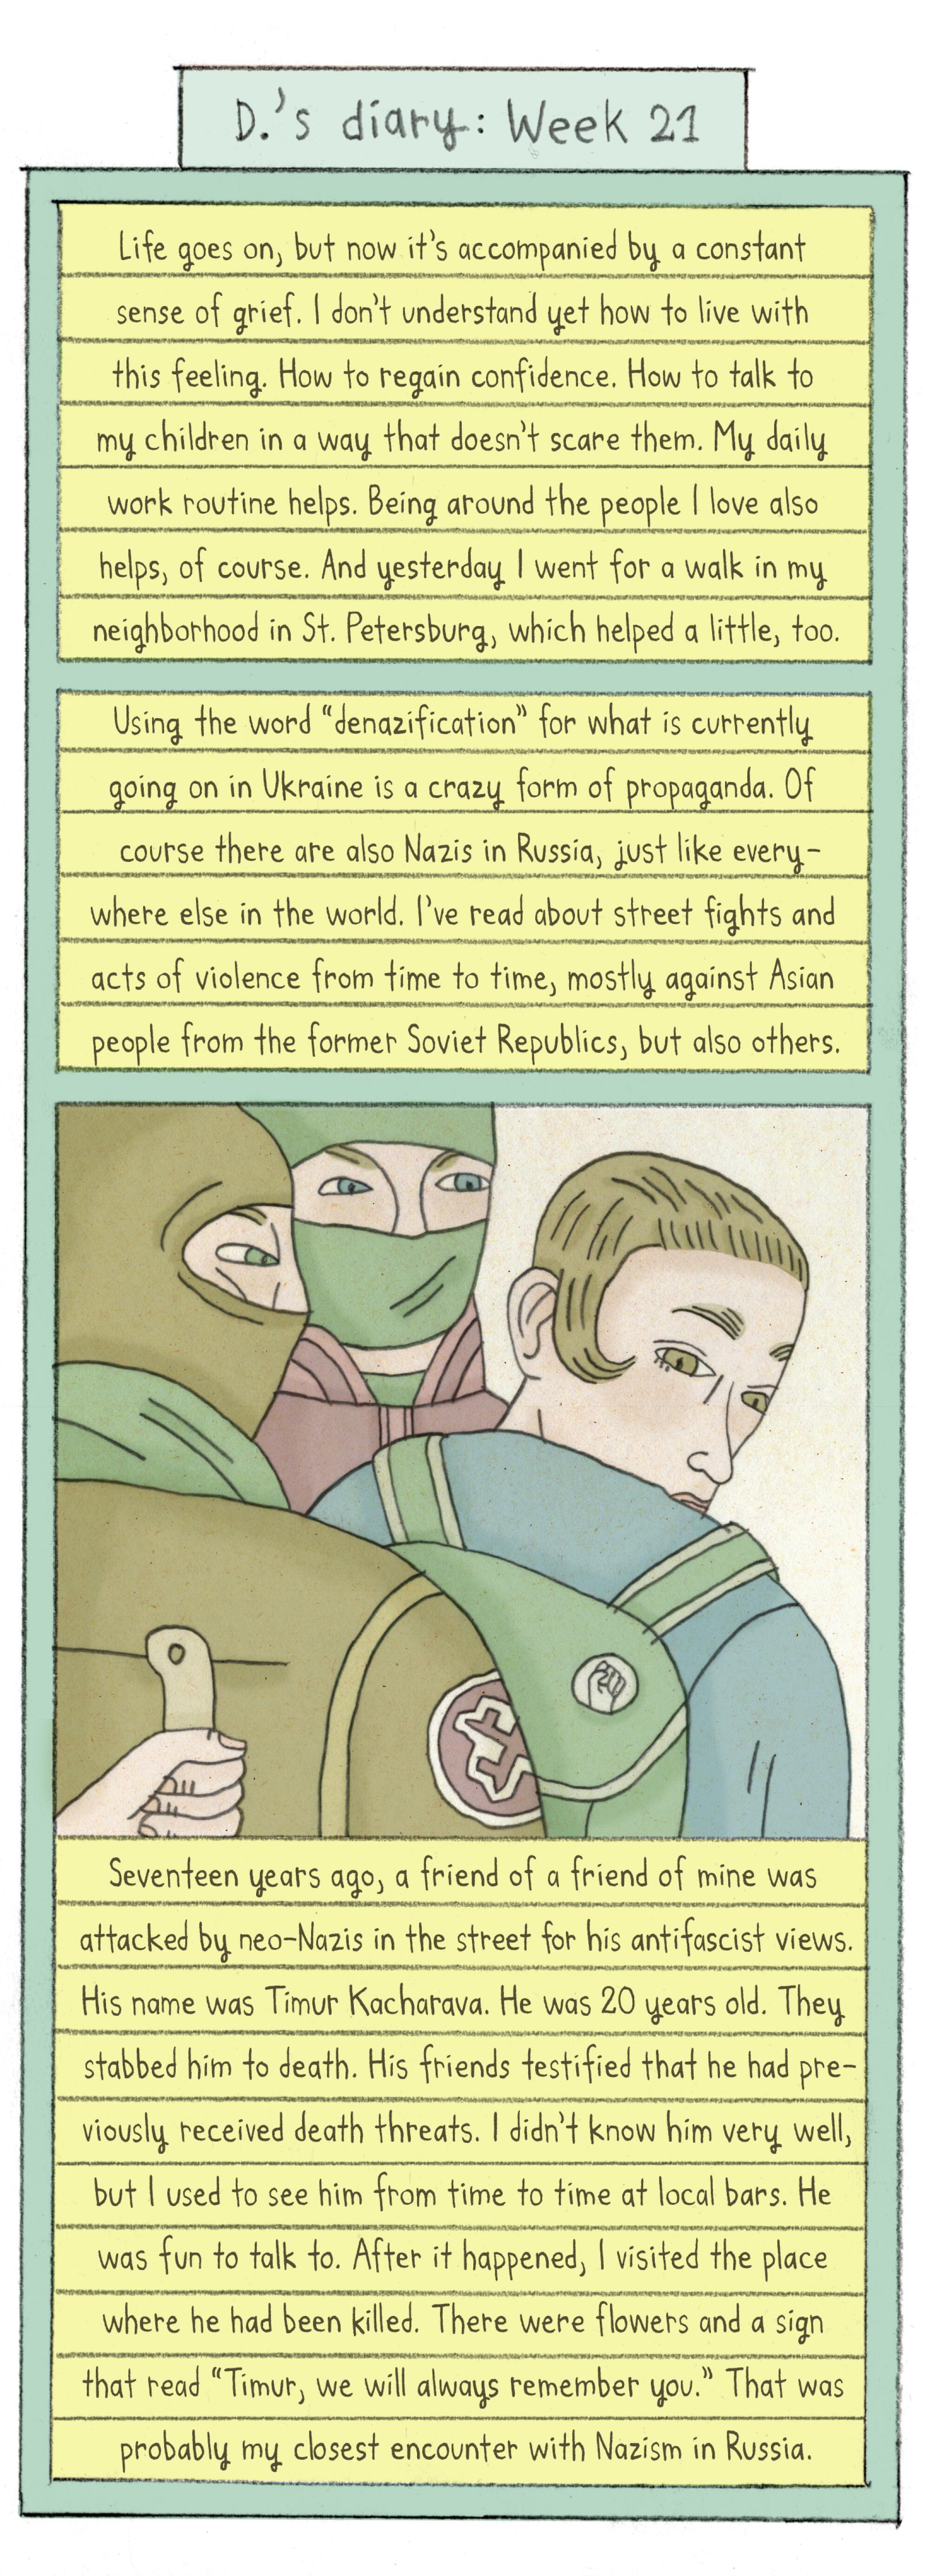 illustrated comic showing a male figure being attacked by two masked figures. One holds a knife.